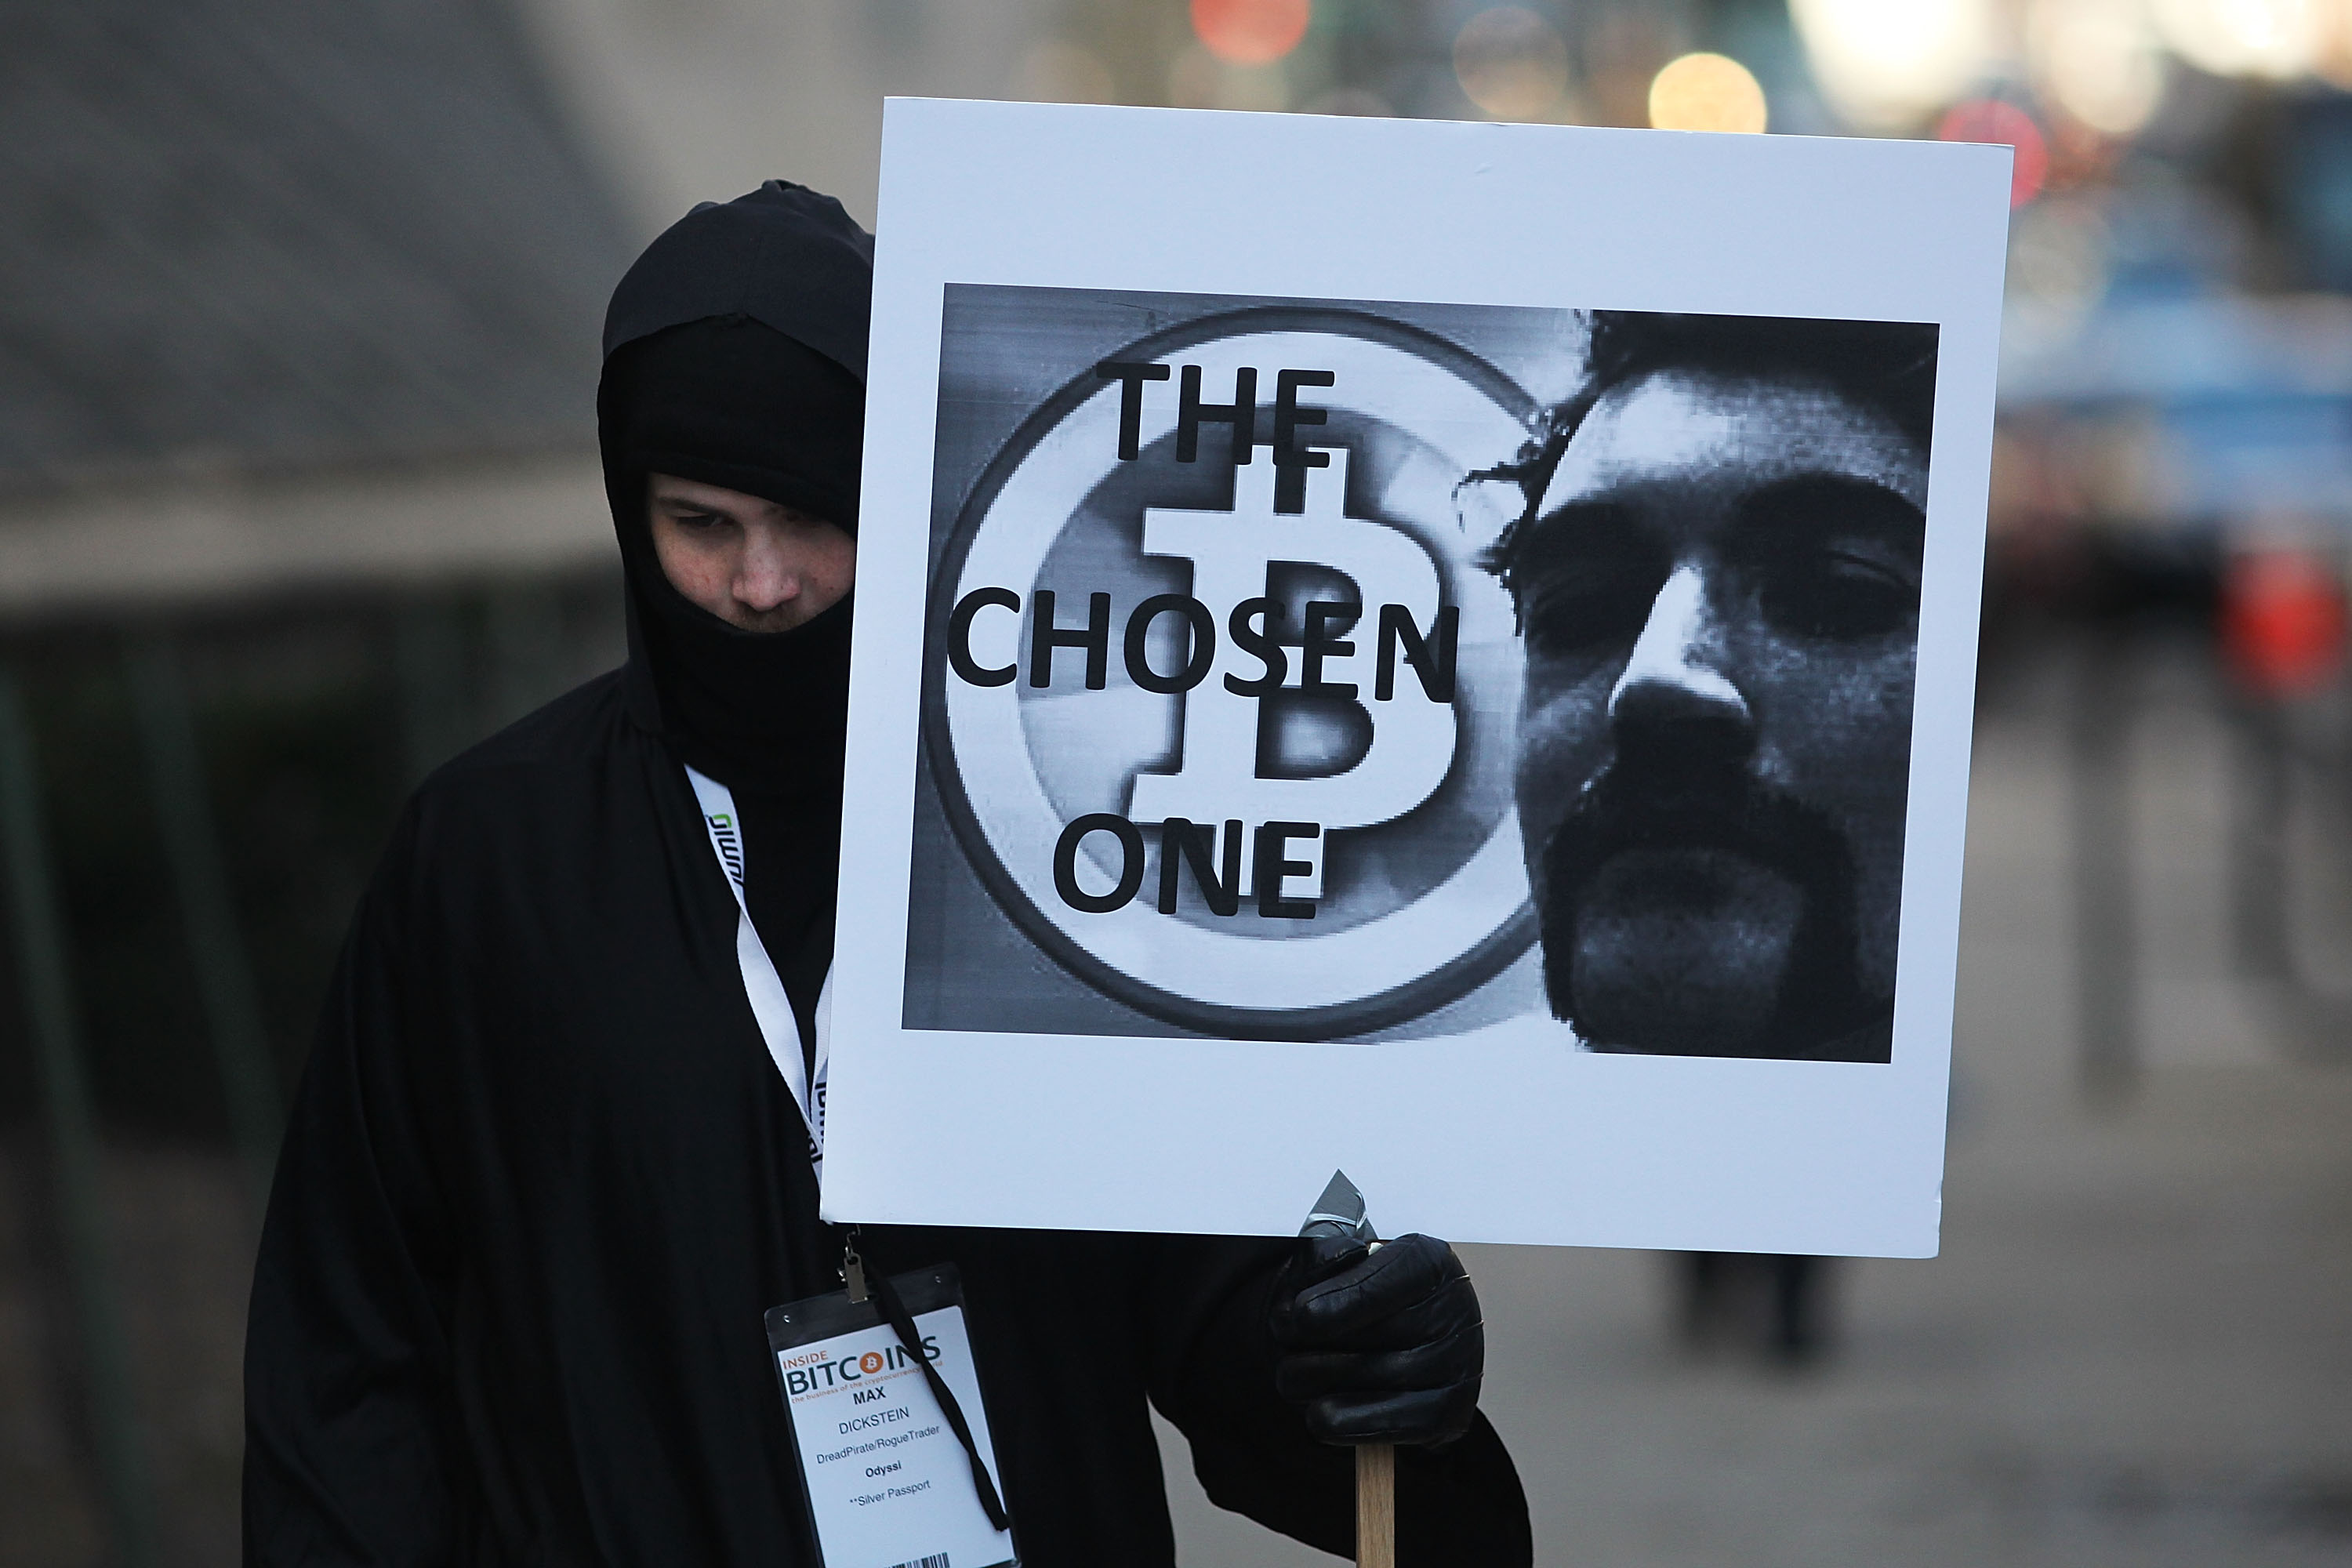 Max Dickstein stands with other upporters of Ross Ulbricht, the alleged creator and operator of the Silk Road underground market, in front of a Manhattan federal court house on the first day of jury selection for his trial on January 13, 2015 in New York City. (Spencer Platt&mdash;Getty Images)